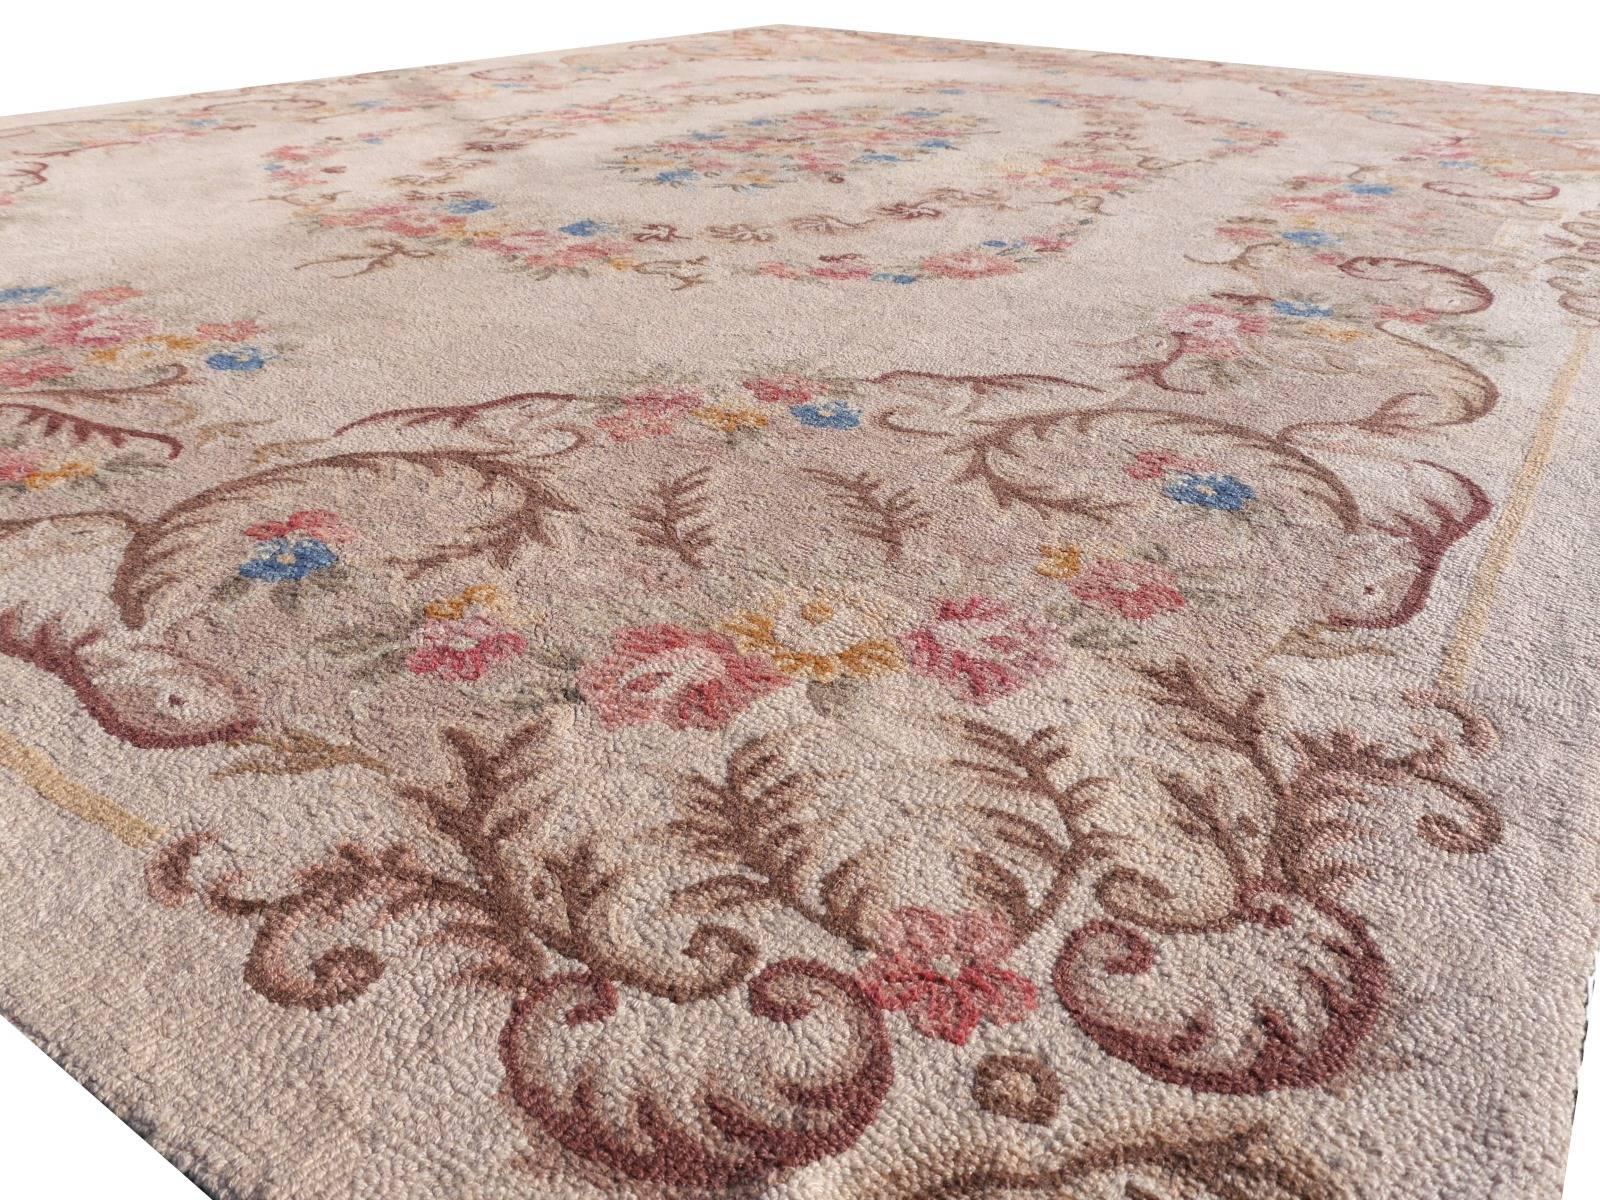 Hand-Crafted 1920s Needlepoint European Rug Arts and Crafts Period/Savonnerie Design For Sale